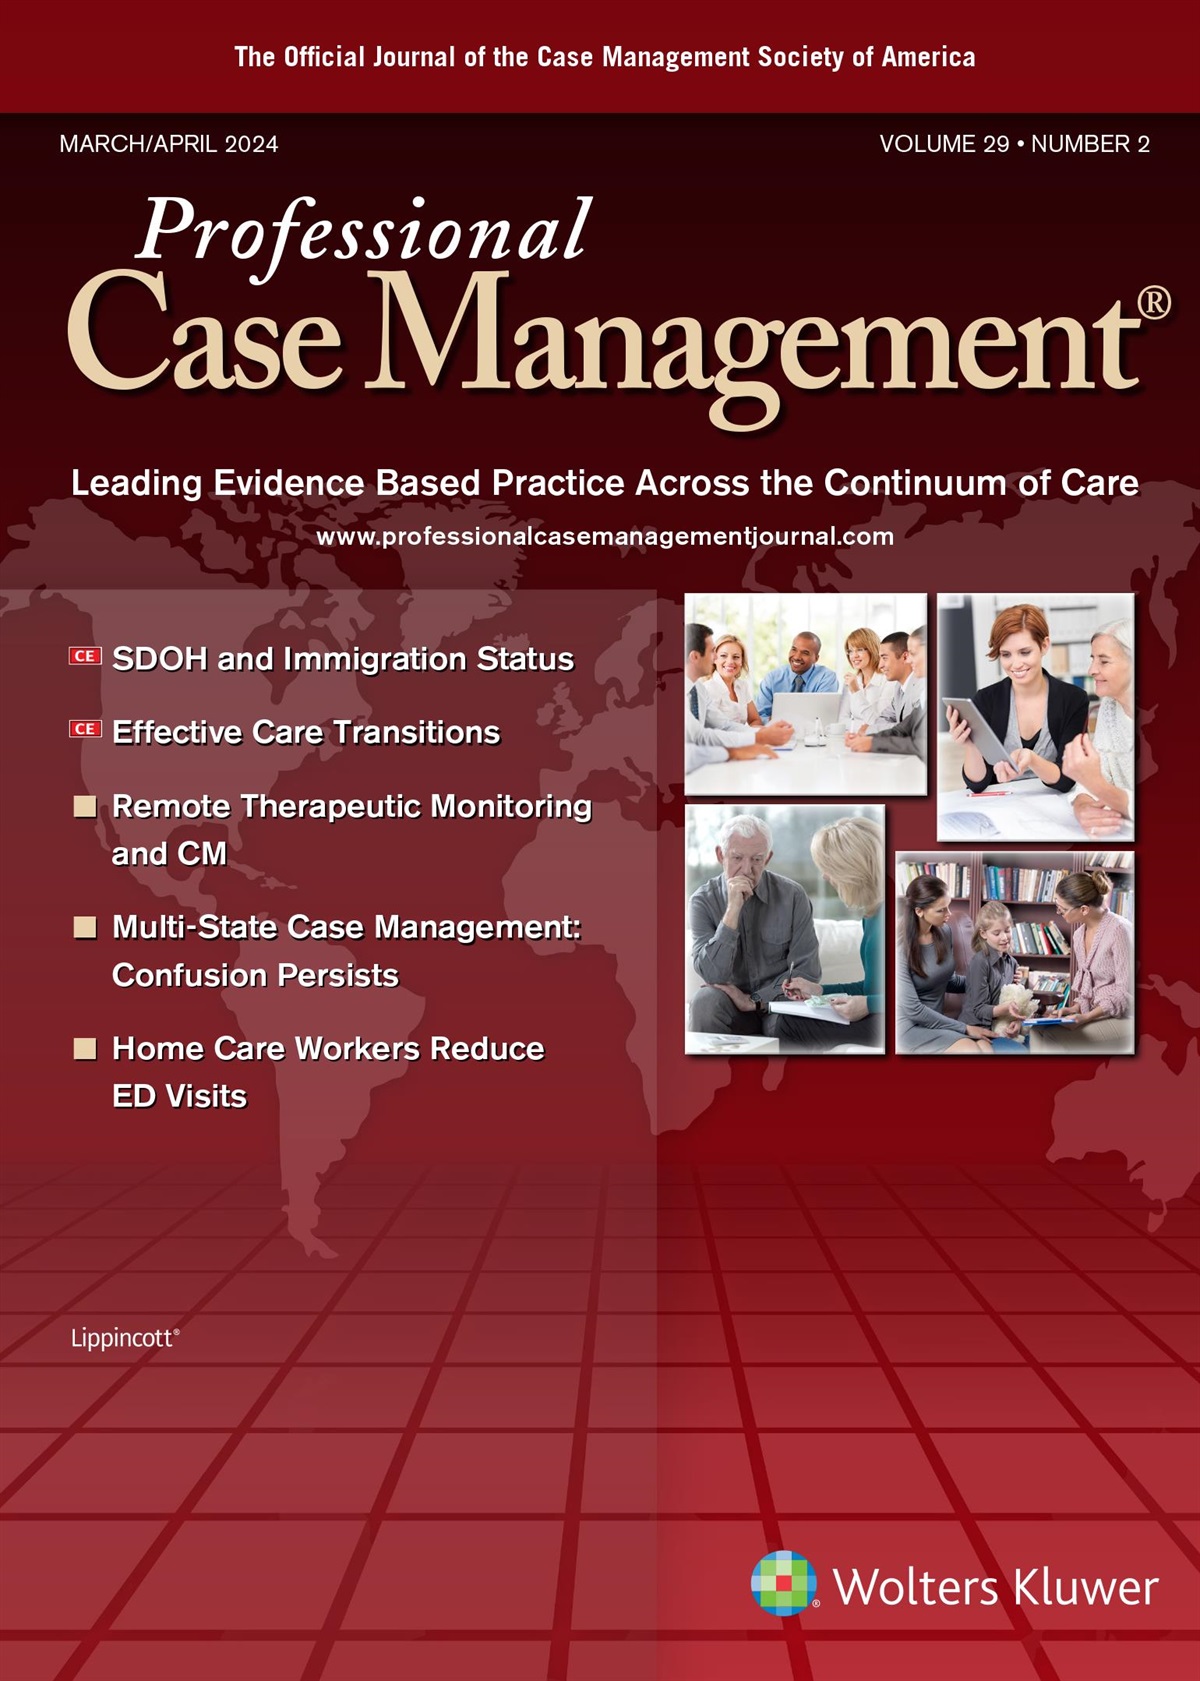 Multistate Case Management: Confusion Persists